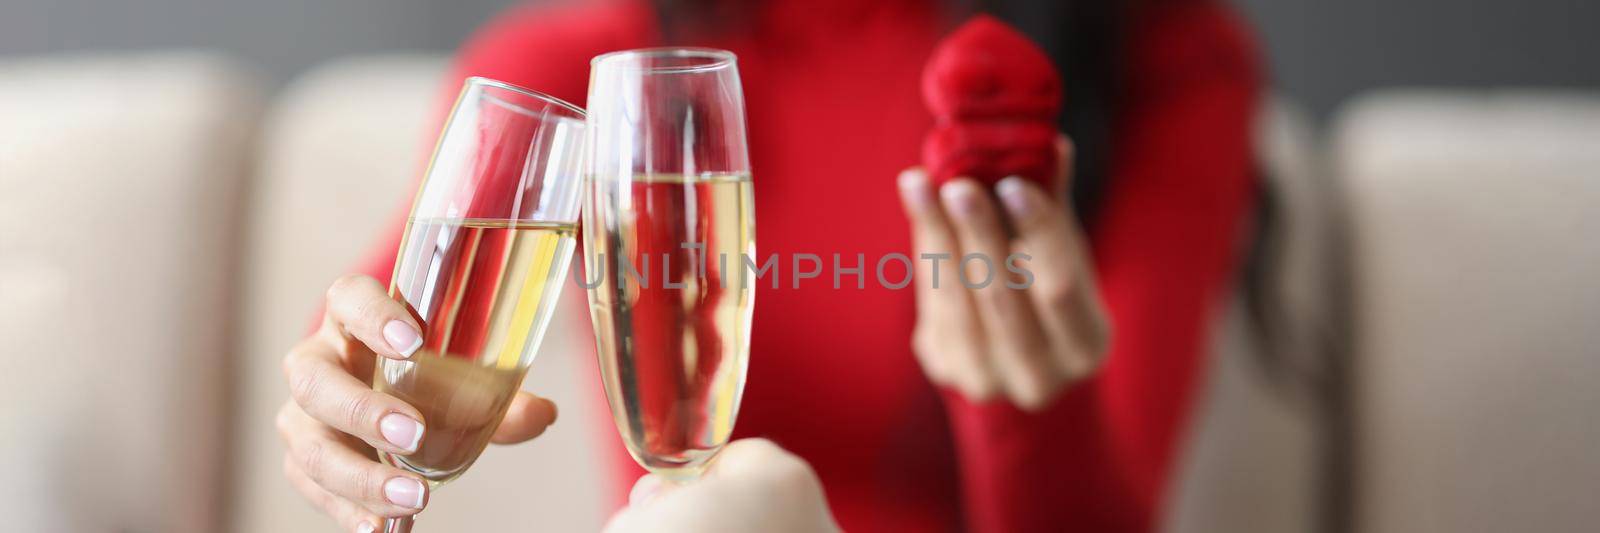 Close-up of couple on romantic dinner, man and woman raise toast with champagne flutes, man proposed to girl, red box with ring. Love, dinner, relationship, spouse, date concept. Blurred background